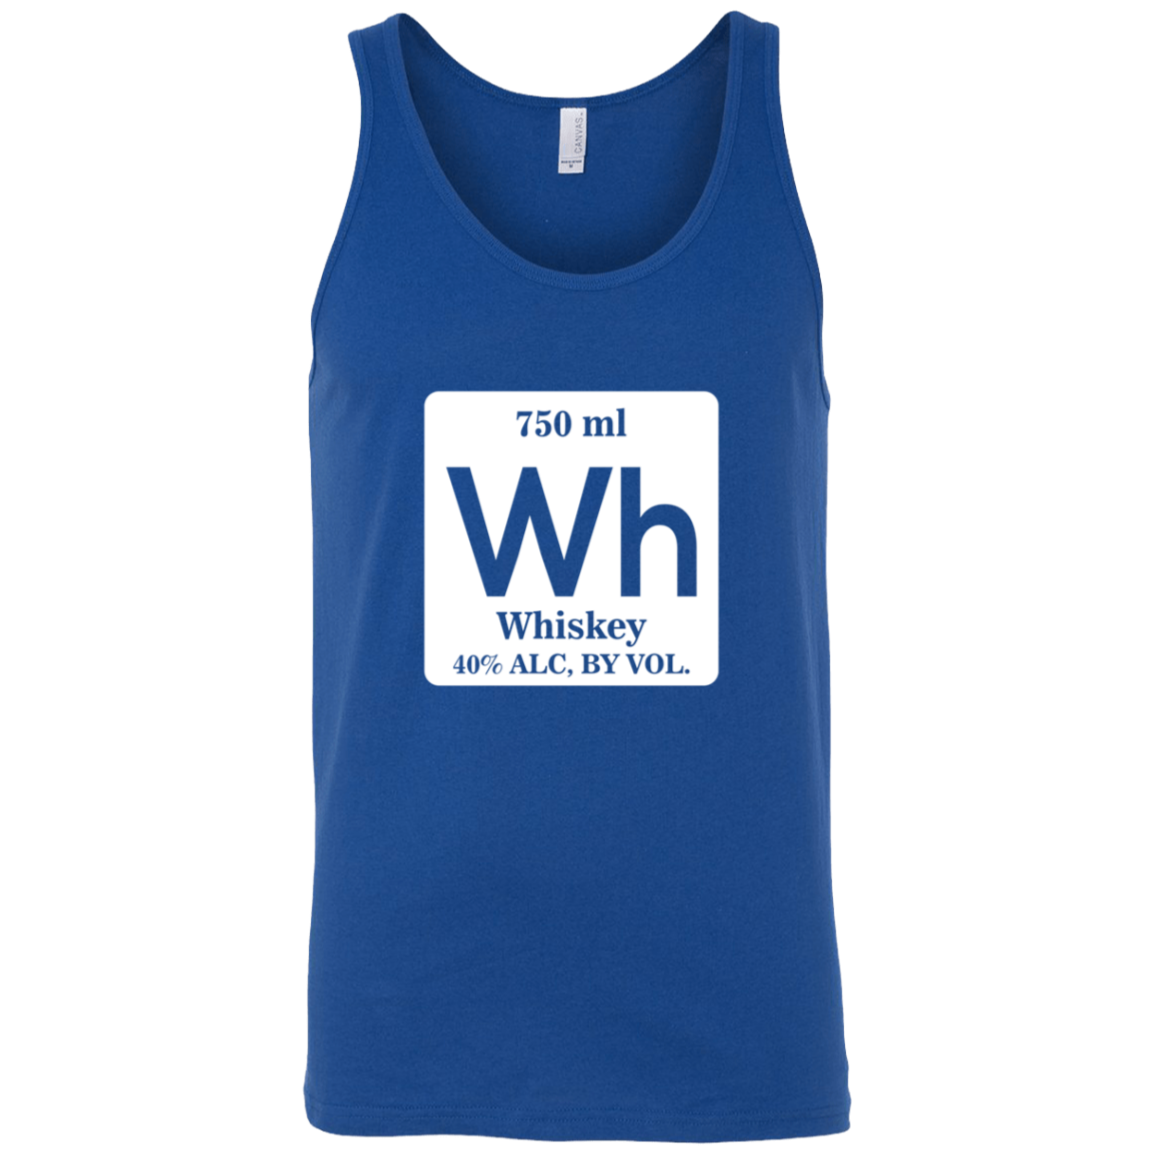 750 ml Whiskey 40% Alc, By Vol Tank Top Apparel - The Beer Lodge